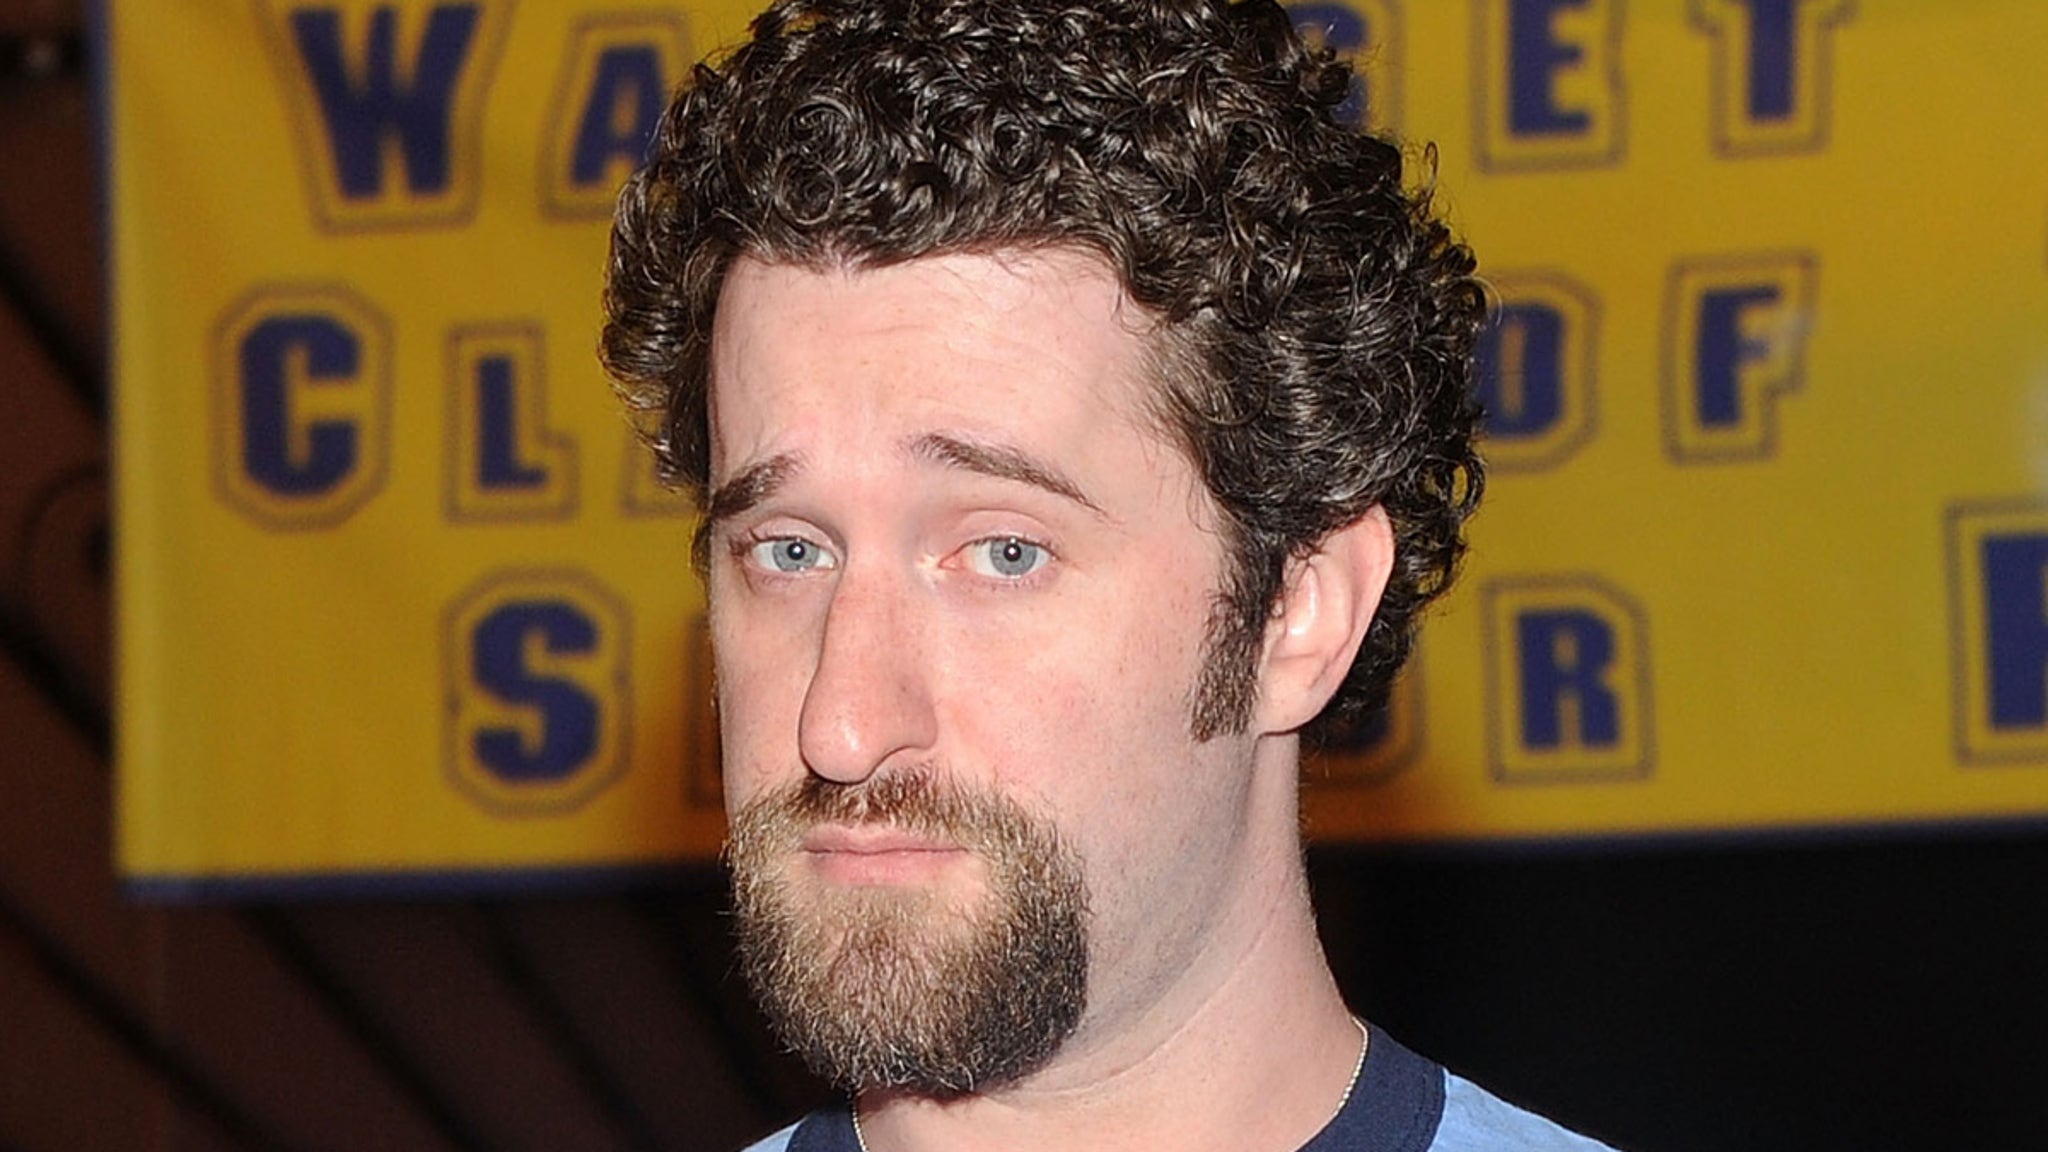 Dustin Diamond Dead at 44 After Battle with Stage 4 Lung Cancer